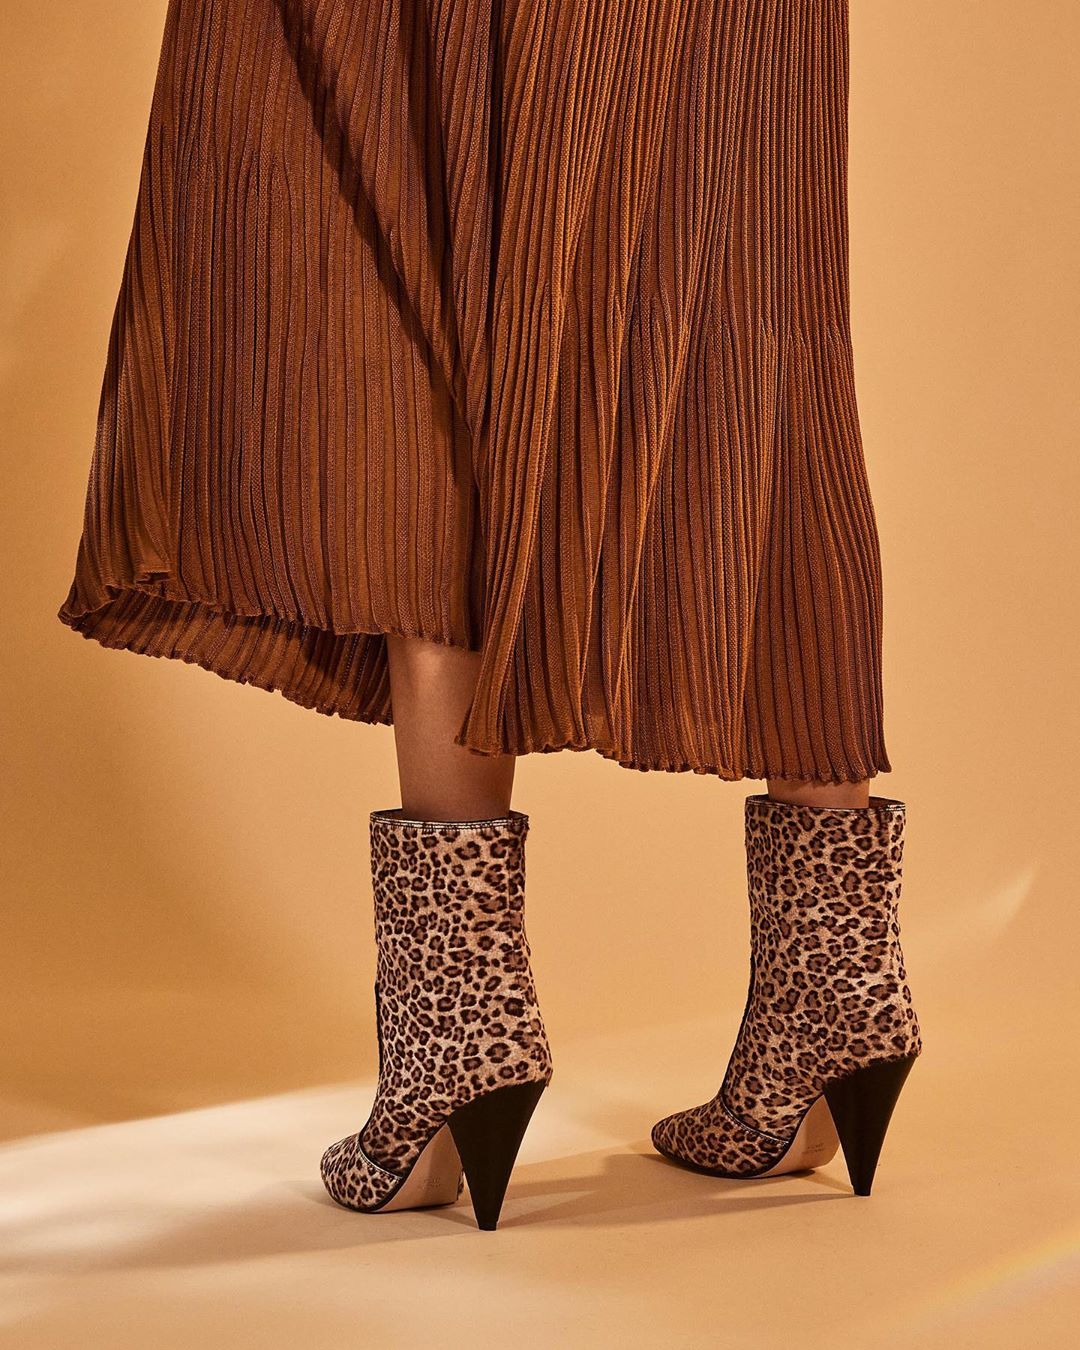 THE OUTNET - Knit dresses and statement ankle boots? It must be fall. 

Shop all your favorite Instagram looks, just visit #linkinbio